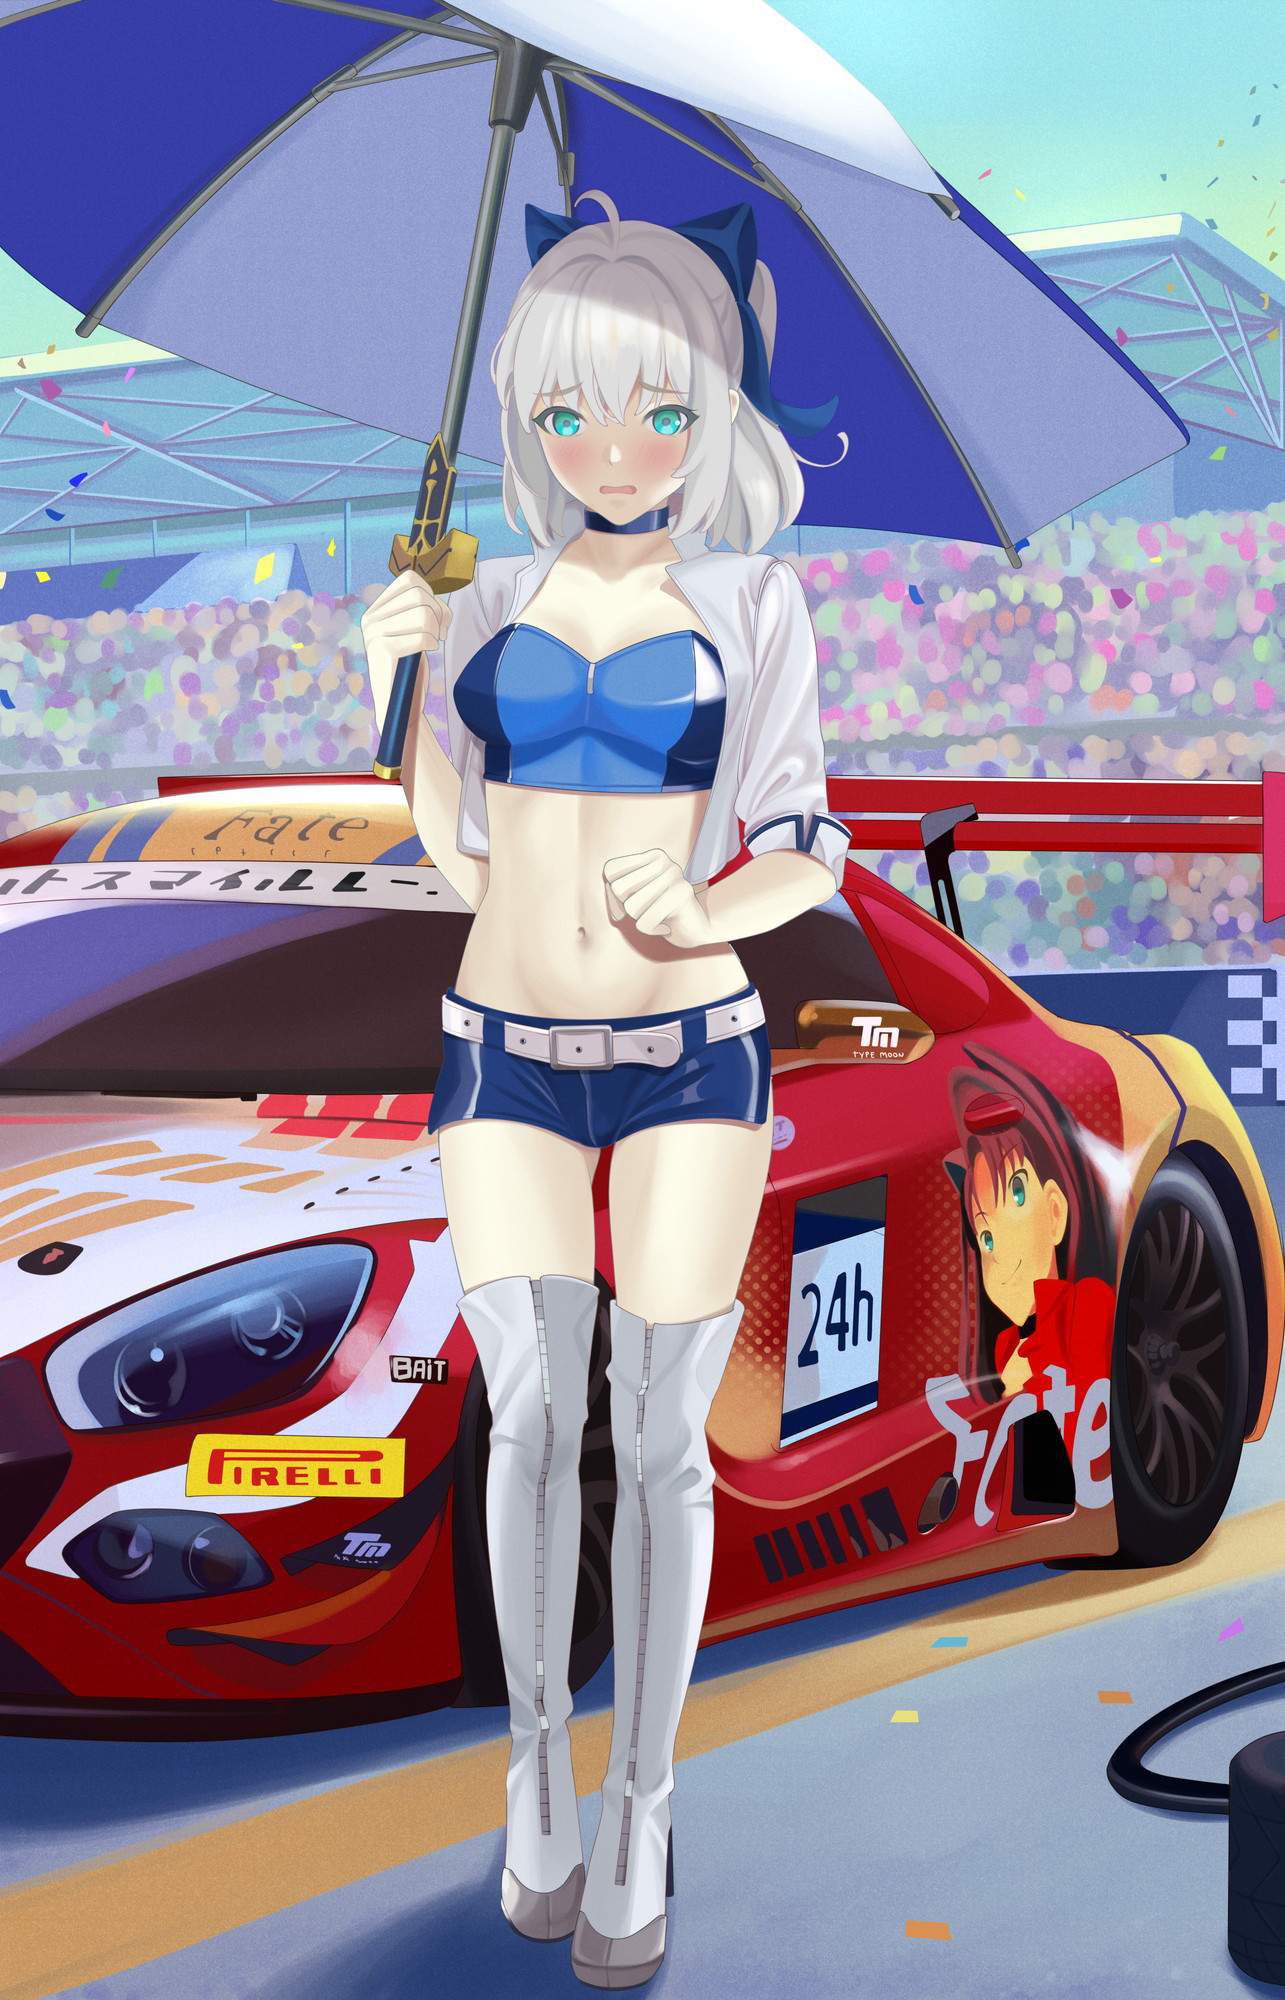 Goddess of the circuit! It is a race queen's young lady who is samurai to the car body in a high leg leotard and a bold ♪ 41